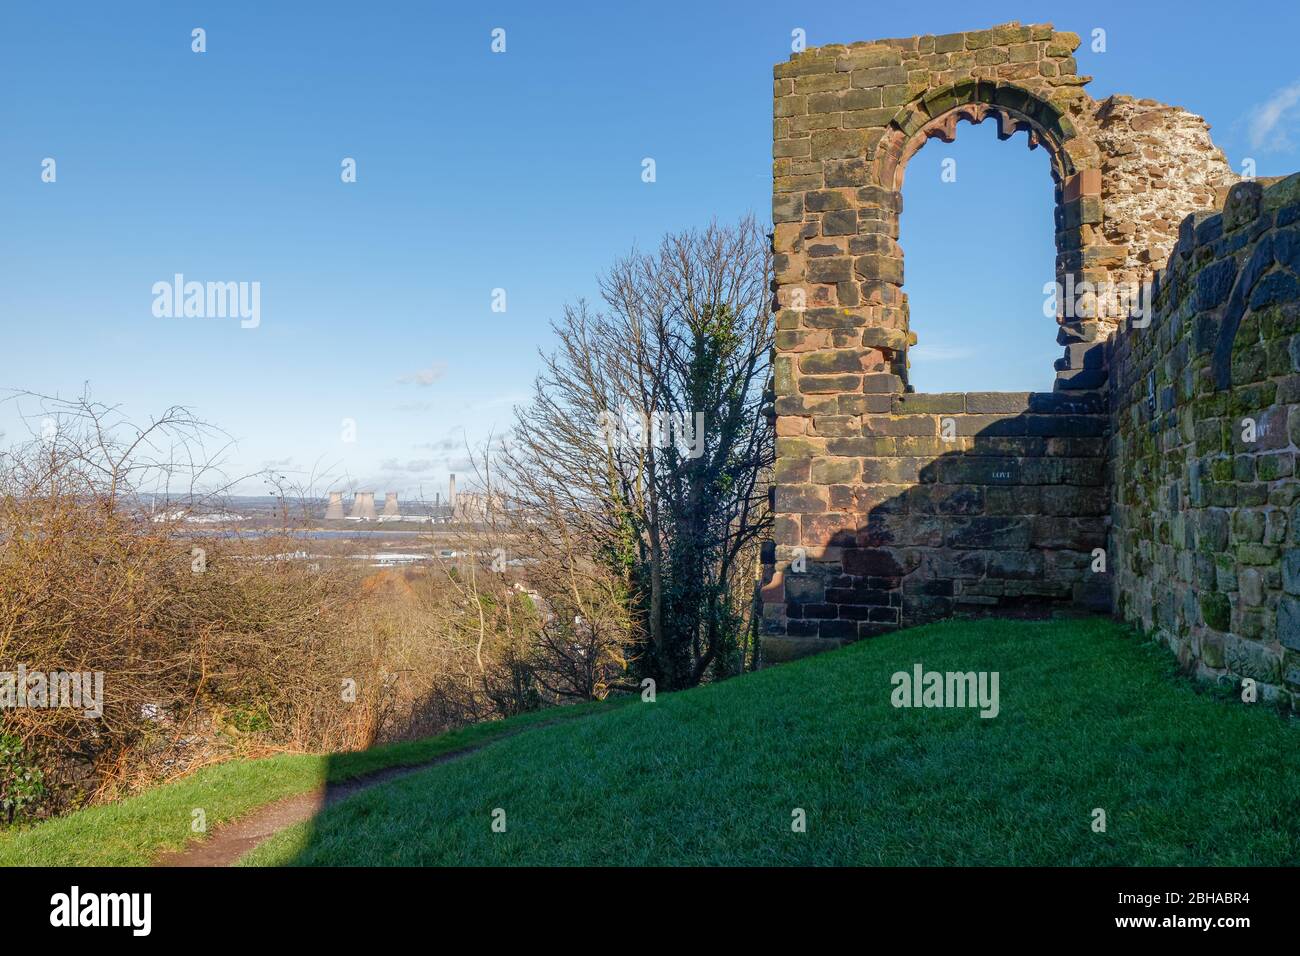 Part of the ruins of Halton Castle which is located on a sandstone outcrop in Runcorn, Cheshire and a great viewpoint for the surrounding area Stock Photo